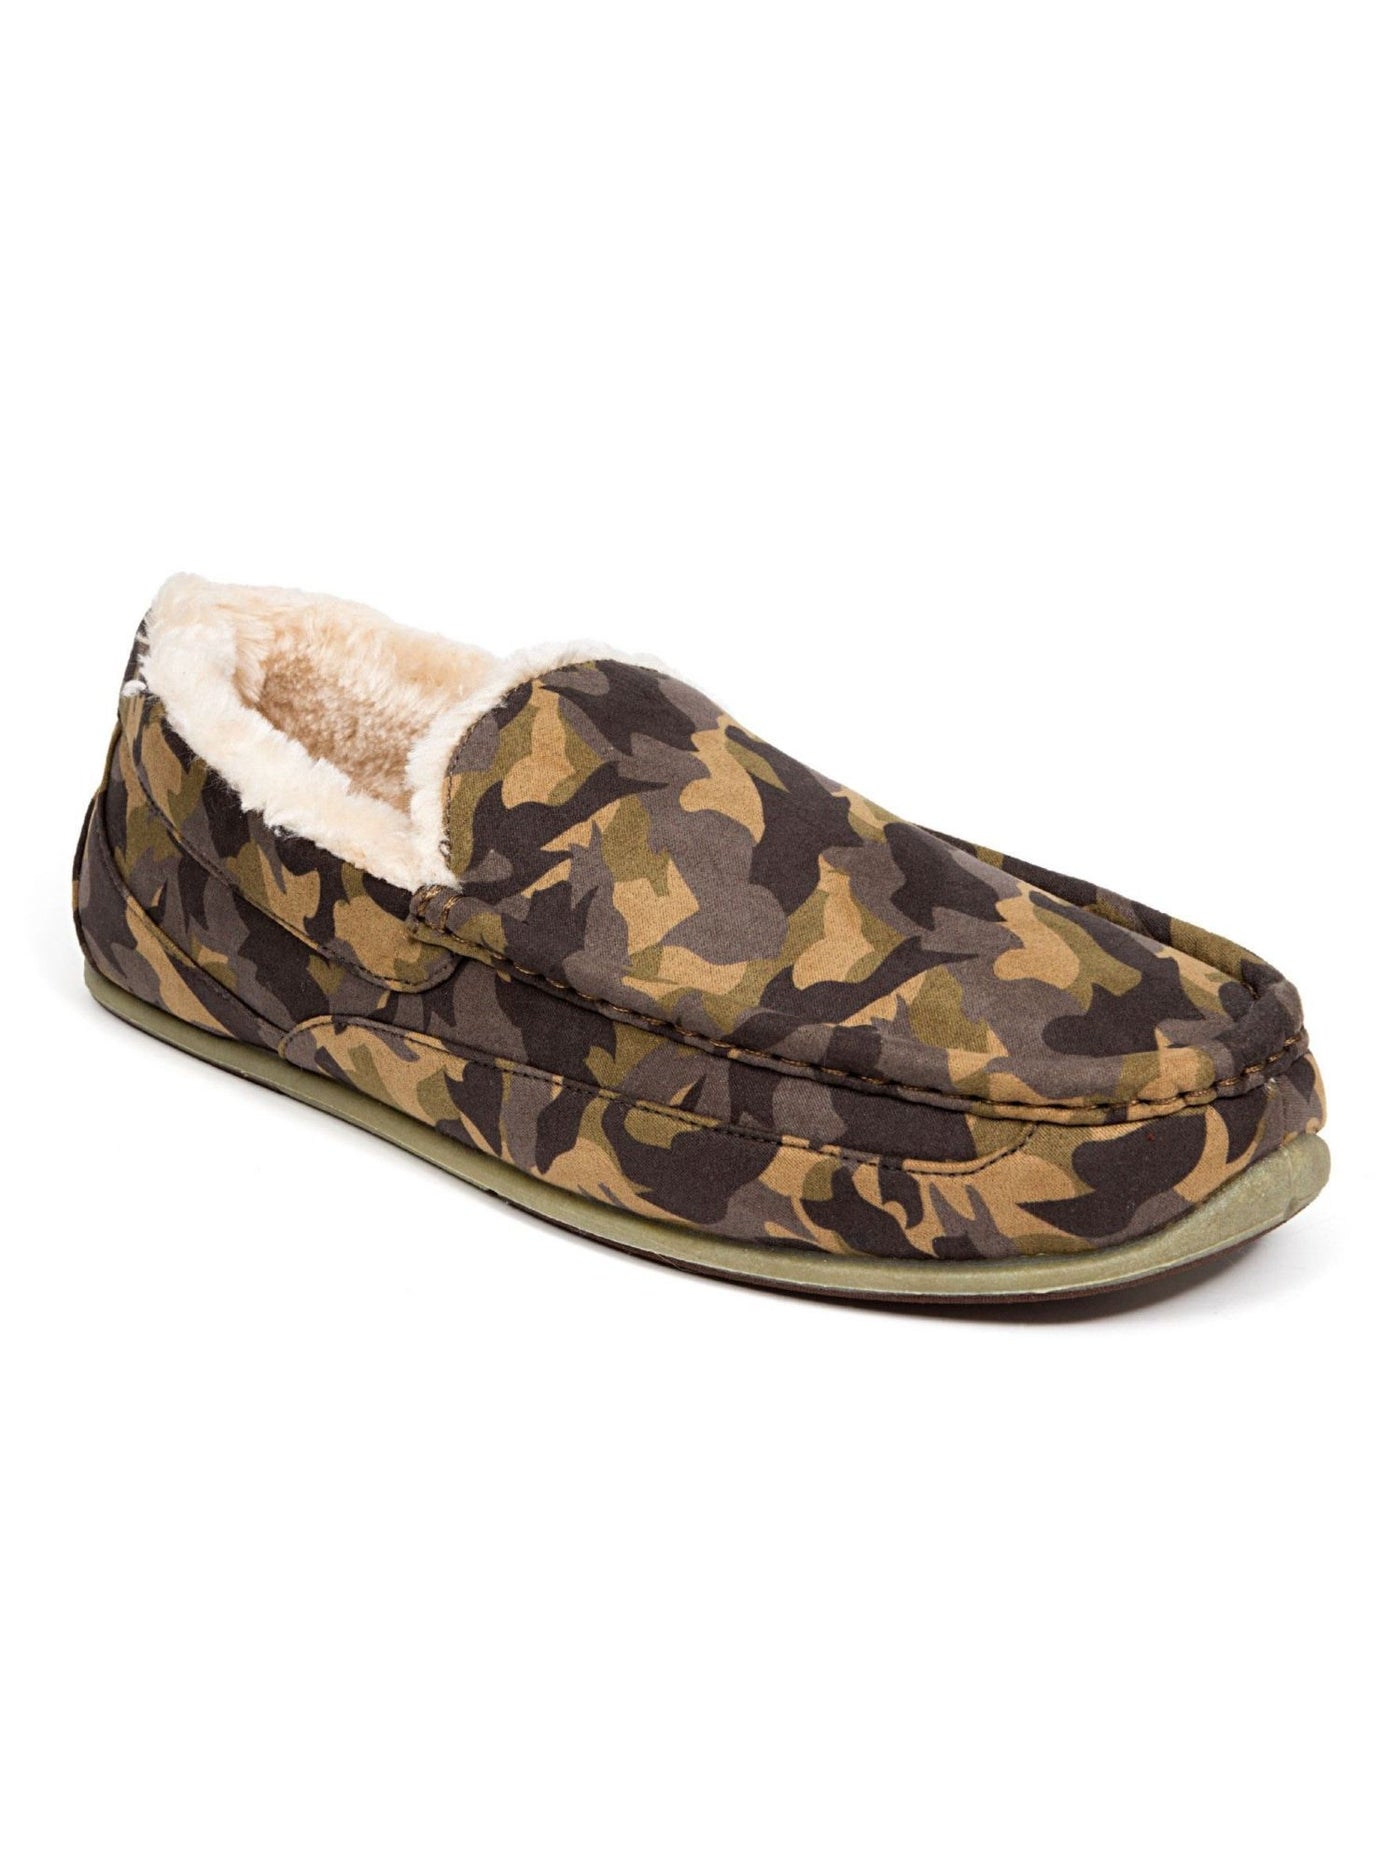 DEER STAGS SLIPPEROOZ Mens Beige Camouflage Cushioned Spun Round Toe Slip On Slippers Shoes 9 M